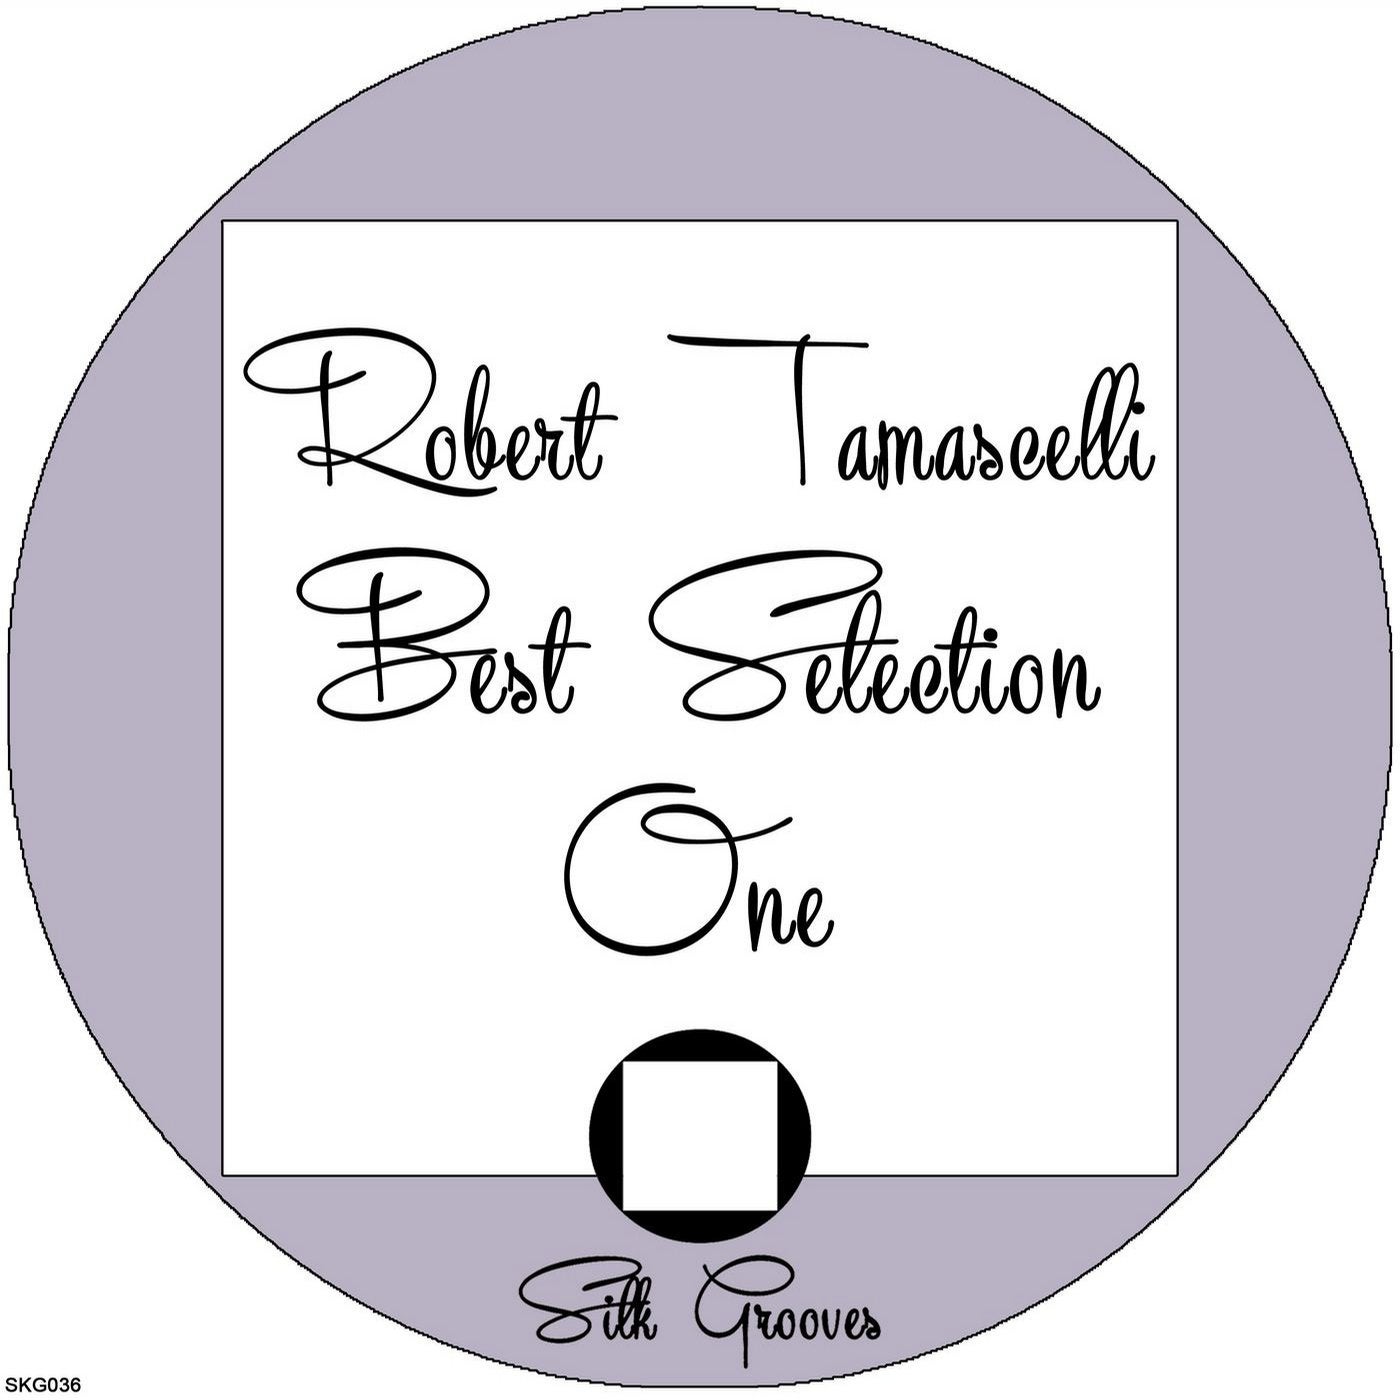 Robert Tamascelli Best Selection One